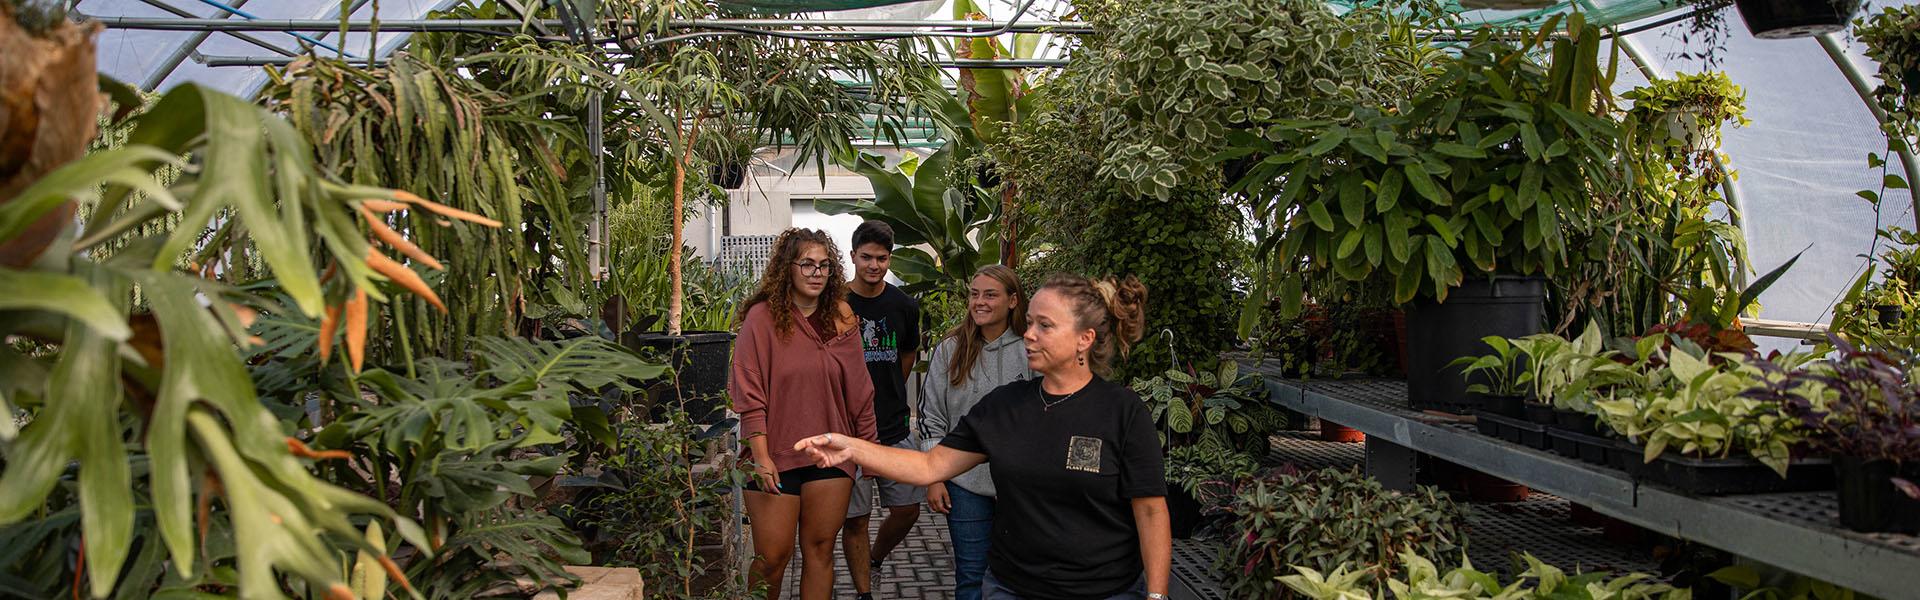 U of M Crookston instructor Theresa Helgeson and and students walking through the greenhouse